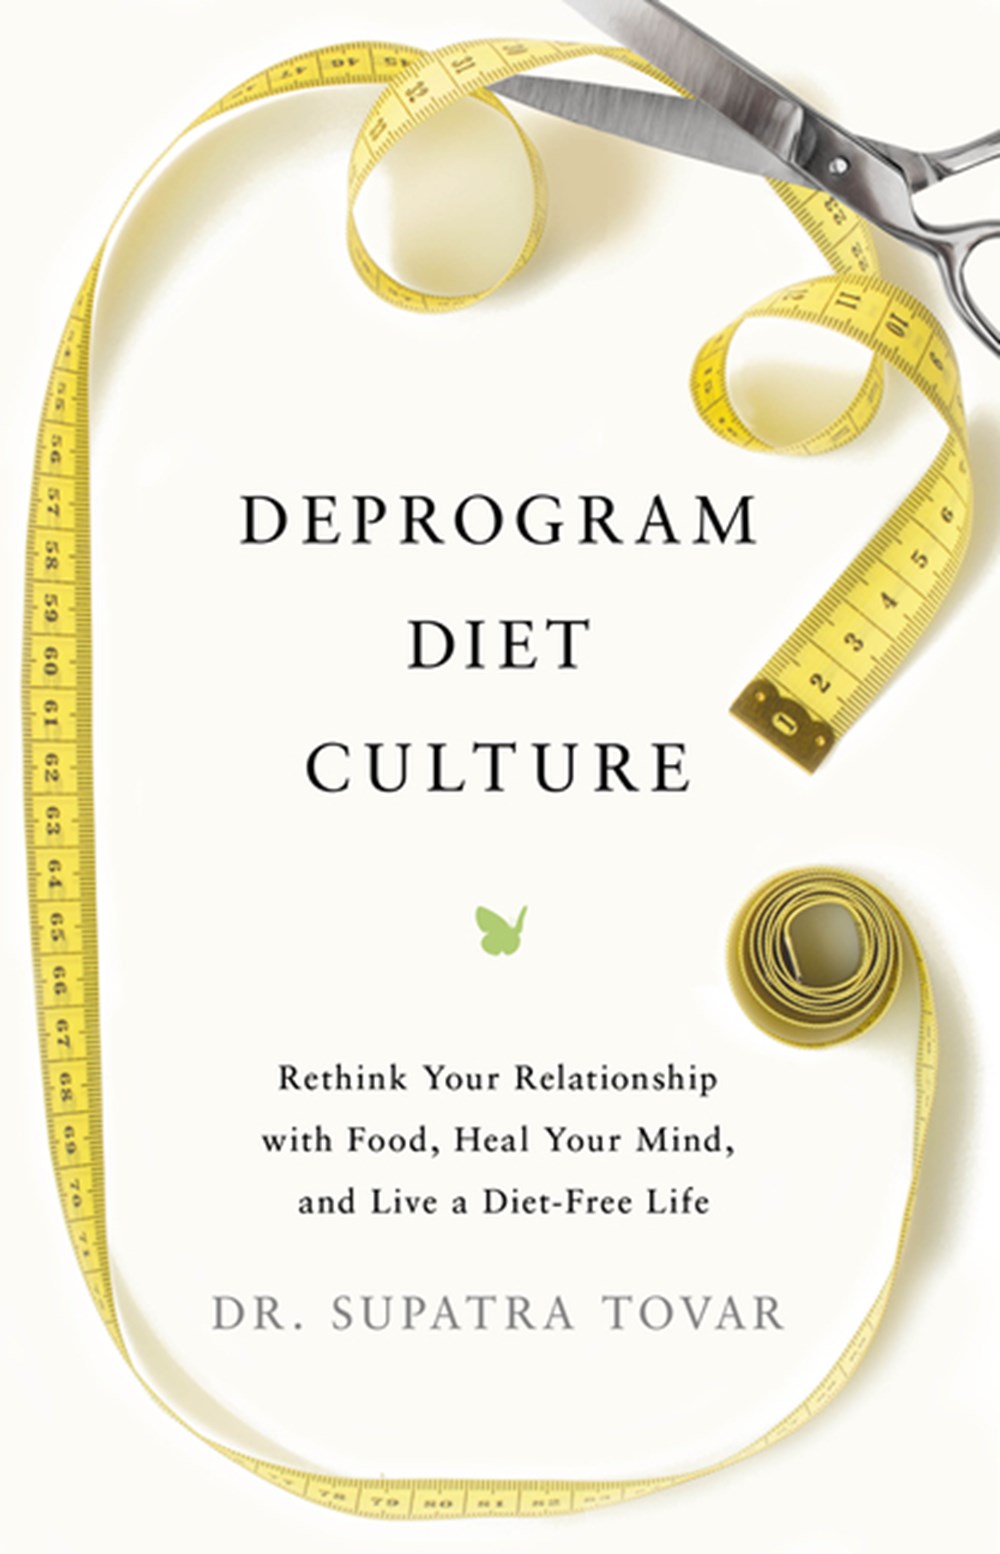 Deprogram Diet Culture: Rethink Your Relationship with Food, Heal Your Mind, and Live a Diet-Free Li